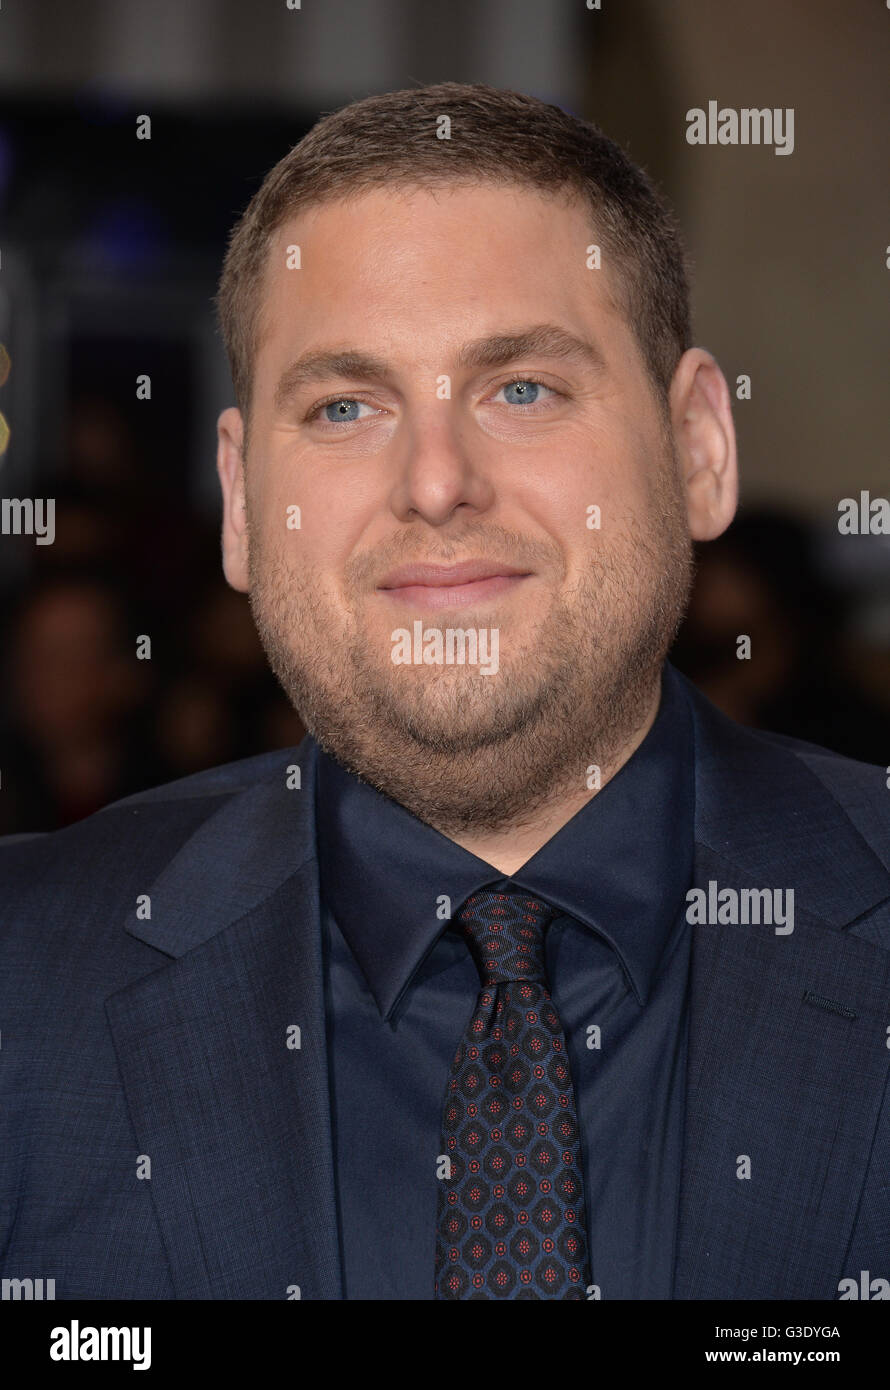 LOS ANGELES, CA - FEBRUARY 1, 2016: Actor Jonah Hill at the world premiere of his movie 'Hail Caesar!' at the Regency Village Theatre, Westwood. Stock Photo